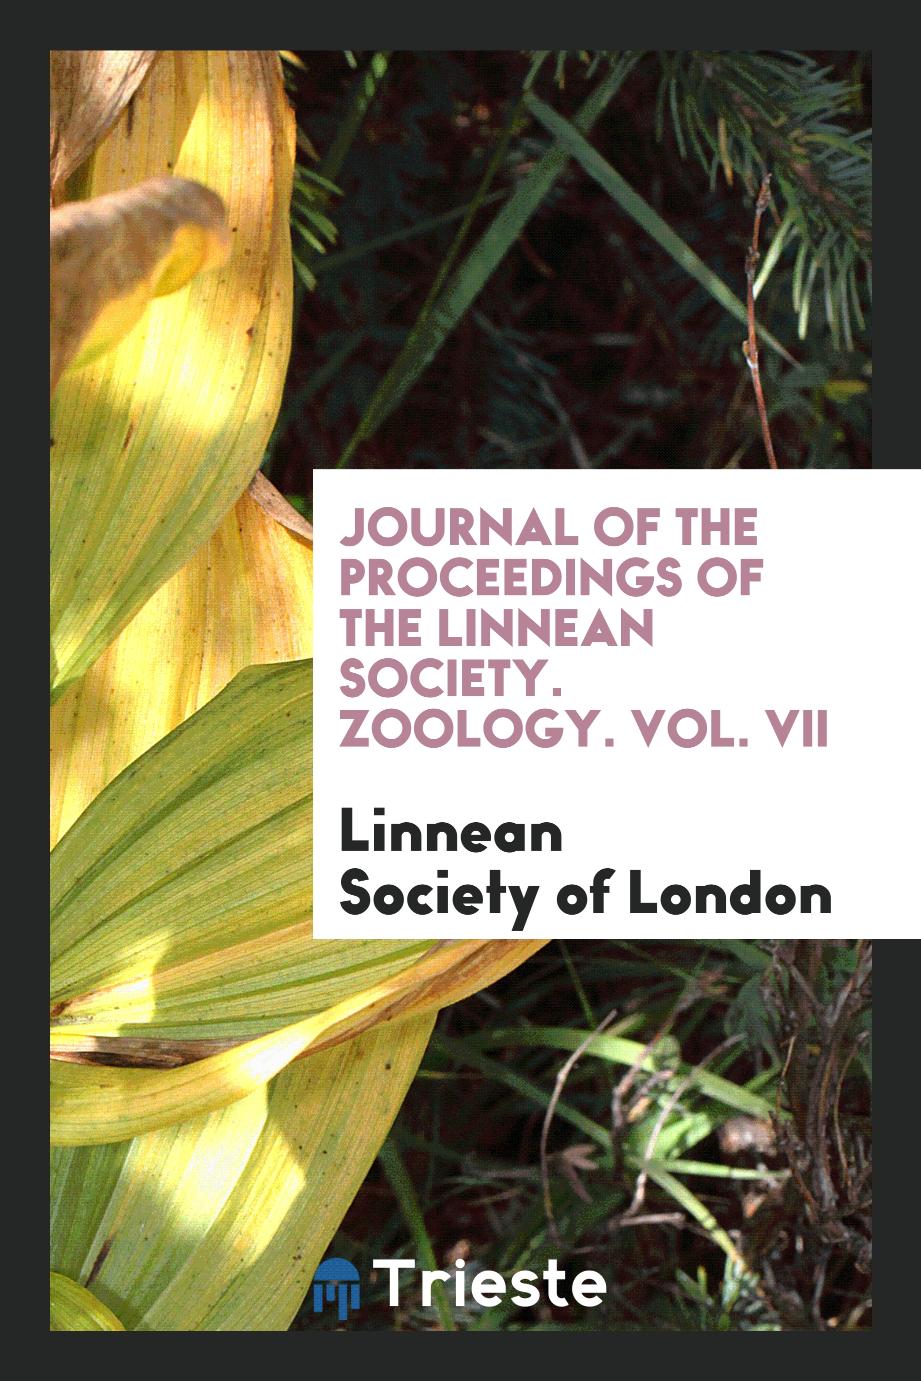 Journal of the Proceedings of the Linnean Society. Zoology. Vol. VII